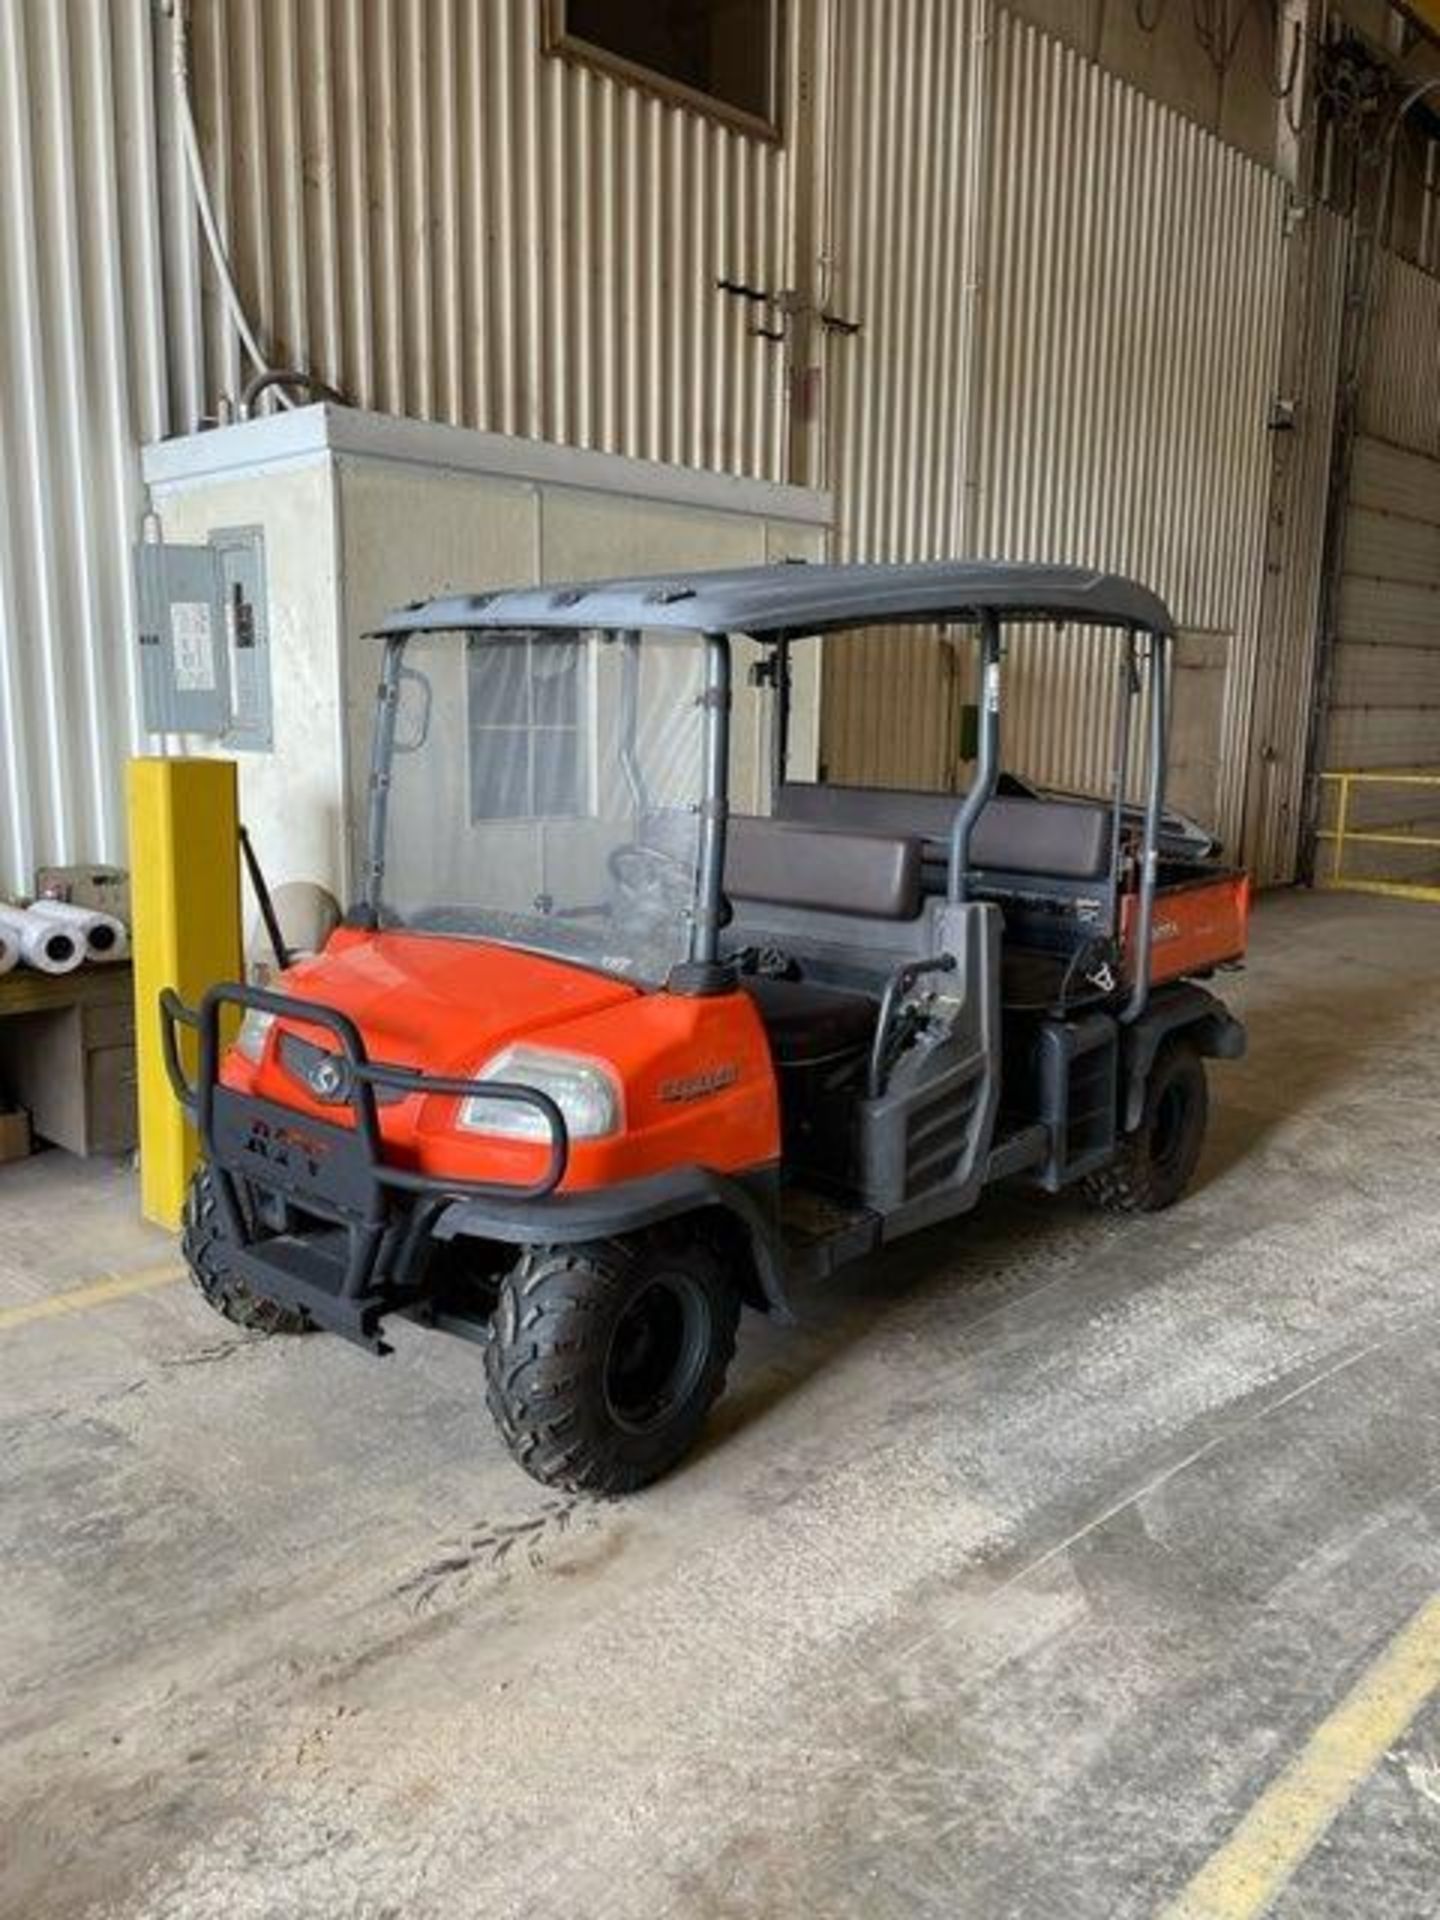 KUBOTA RTV1140 CPX DIESEL UTILITY VEHICLE, 2-ROW COLLAPSIBLE SEATING, CANOPY WITH FRONT - Image 2 of 7